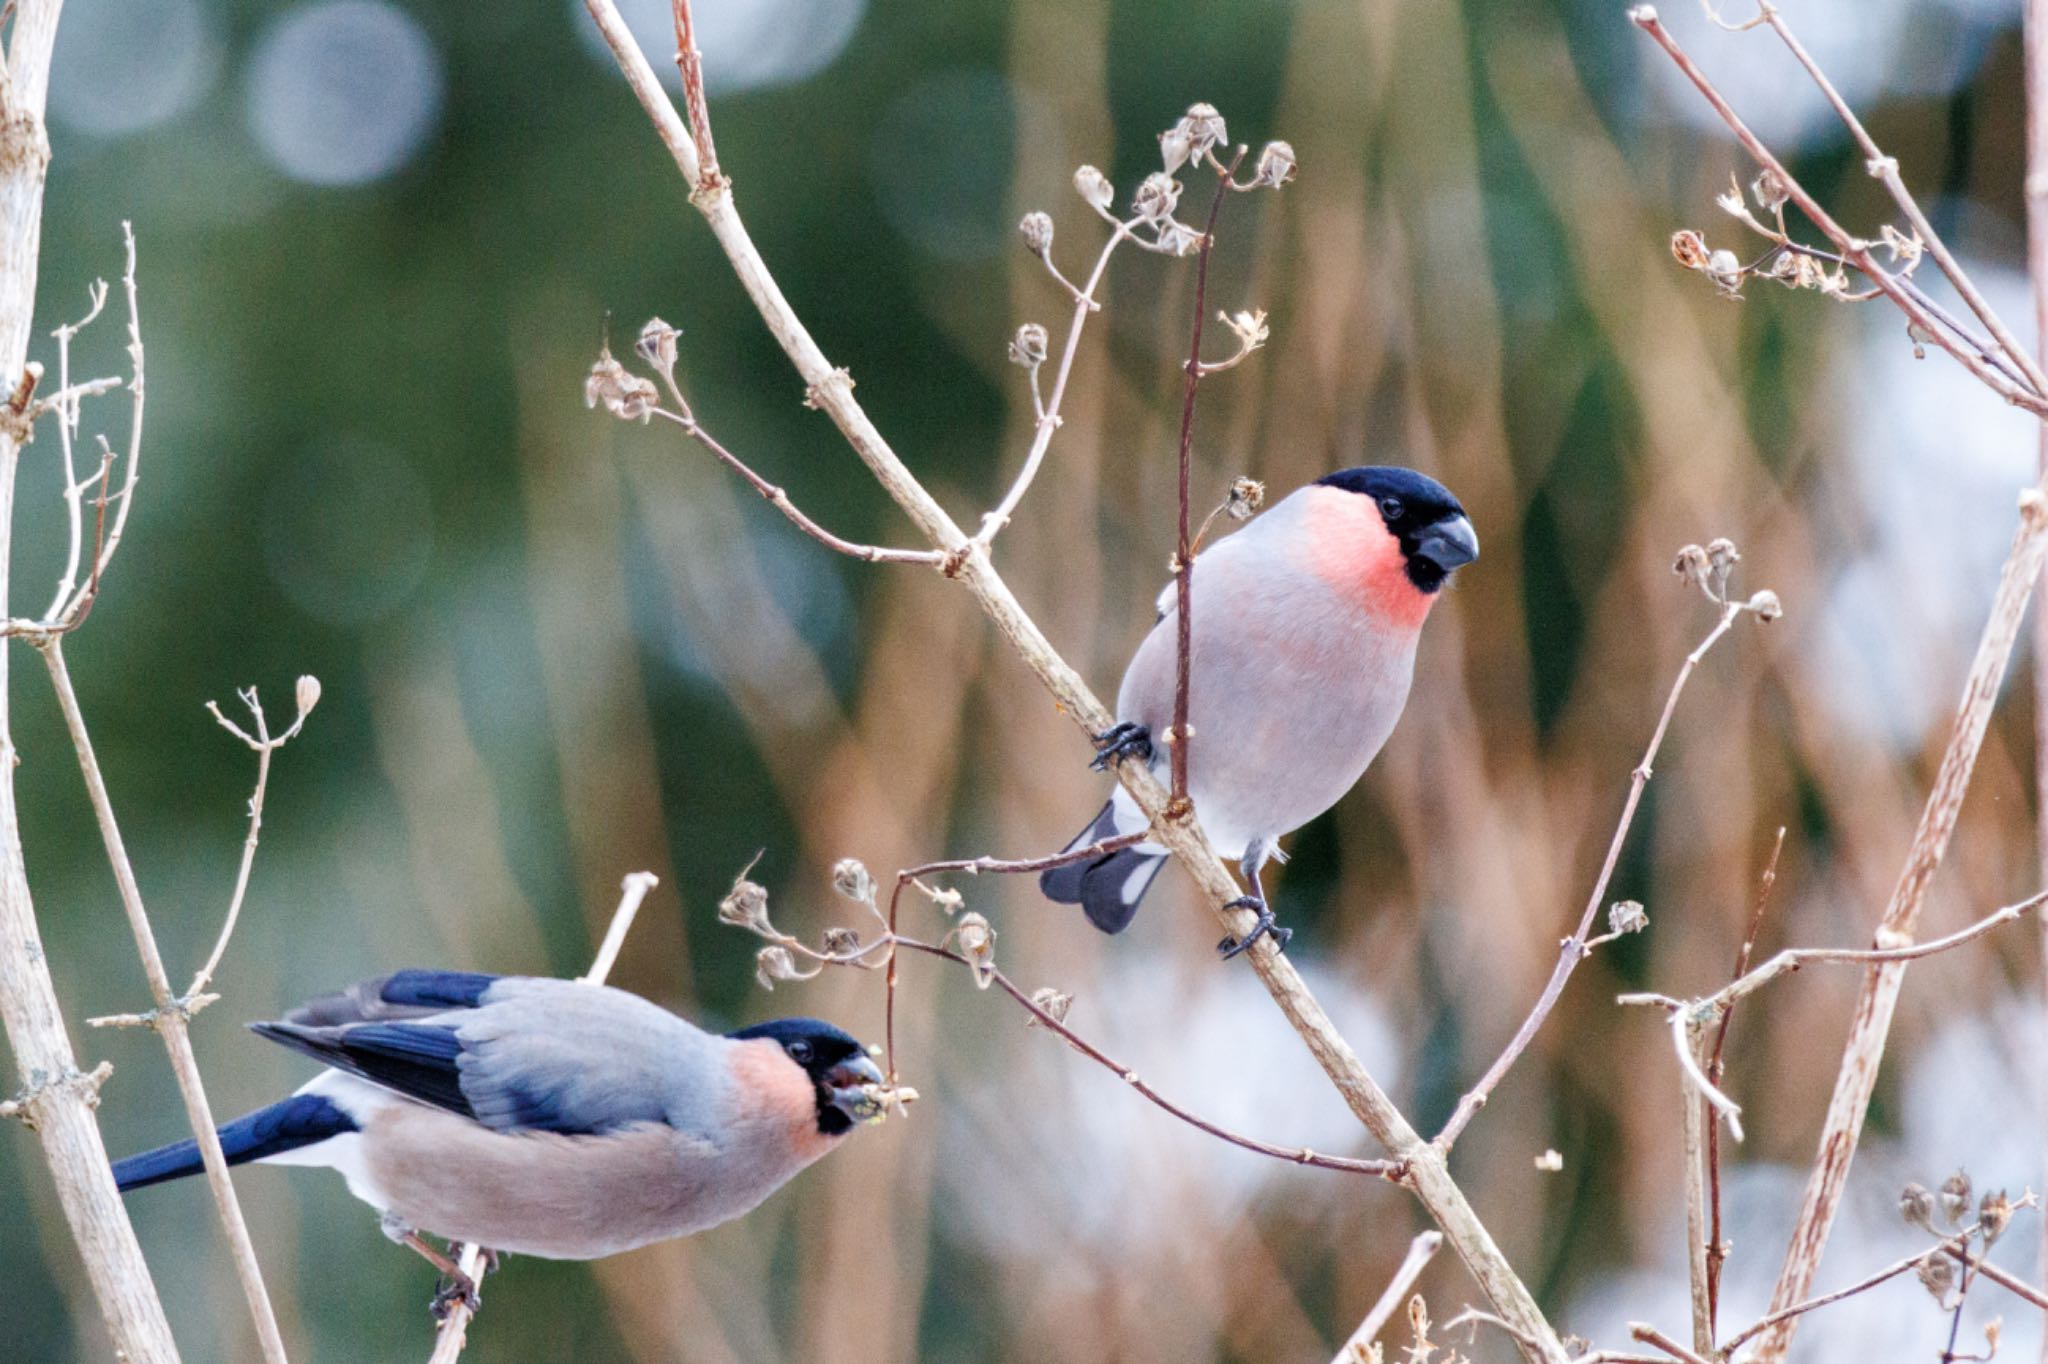 Photo of Eurasian Bullfinch at Tomakomai Experimental Forest by シマシマ38